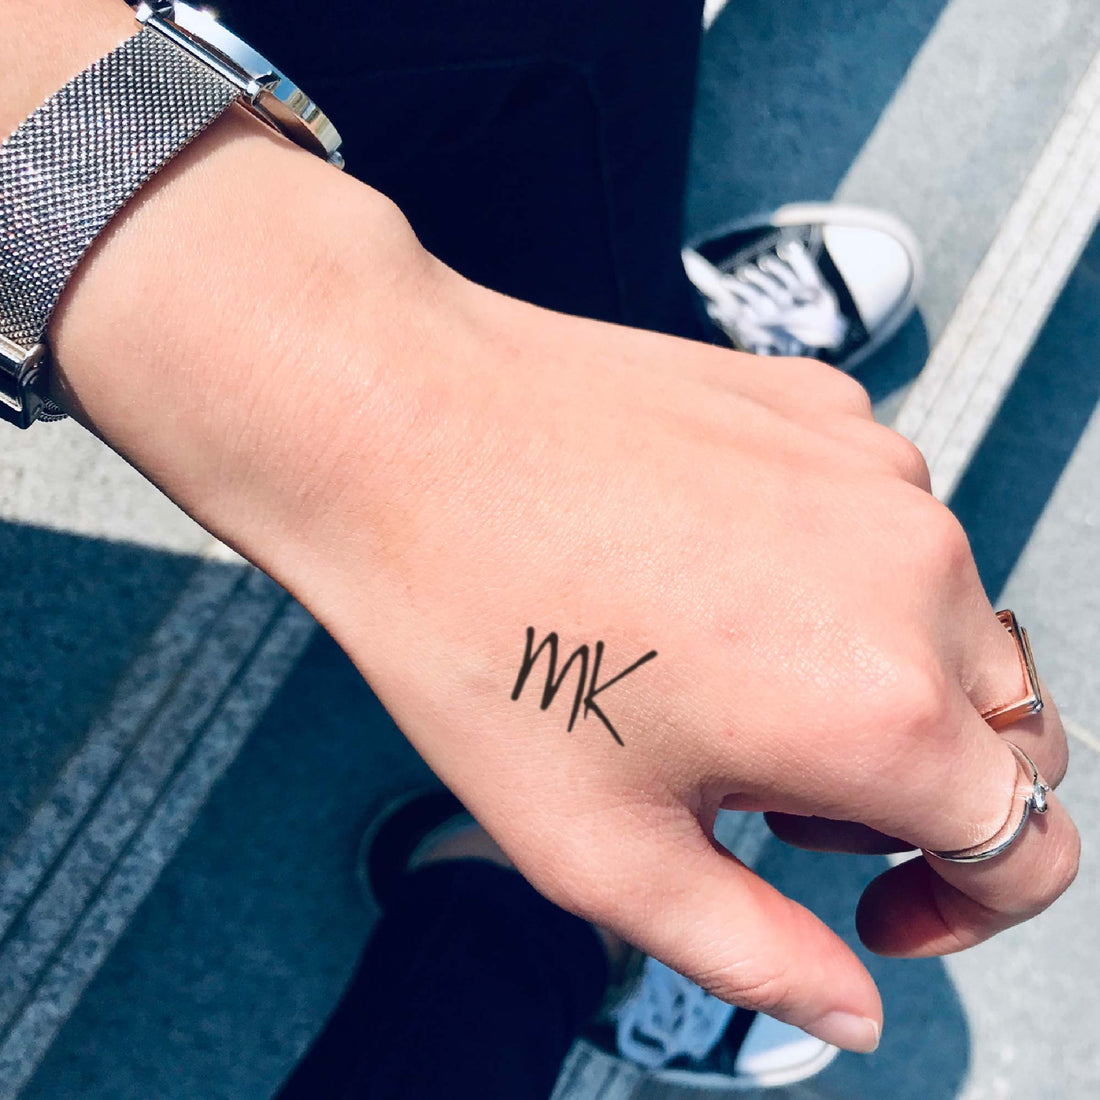 MK custom temporary tattoo sticker design idea inspiration meanings removal arm wrist hand words font name signature calligraphy lyrics tour concert outfits merch accessory gift souvenir costumes wear dress up code